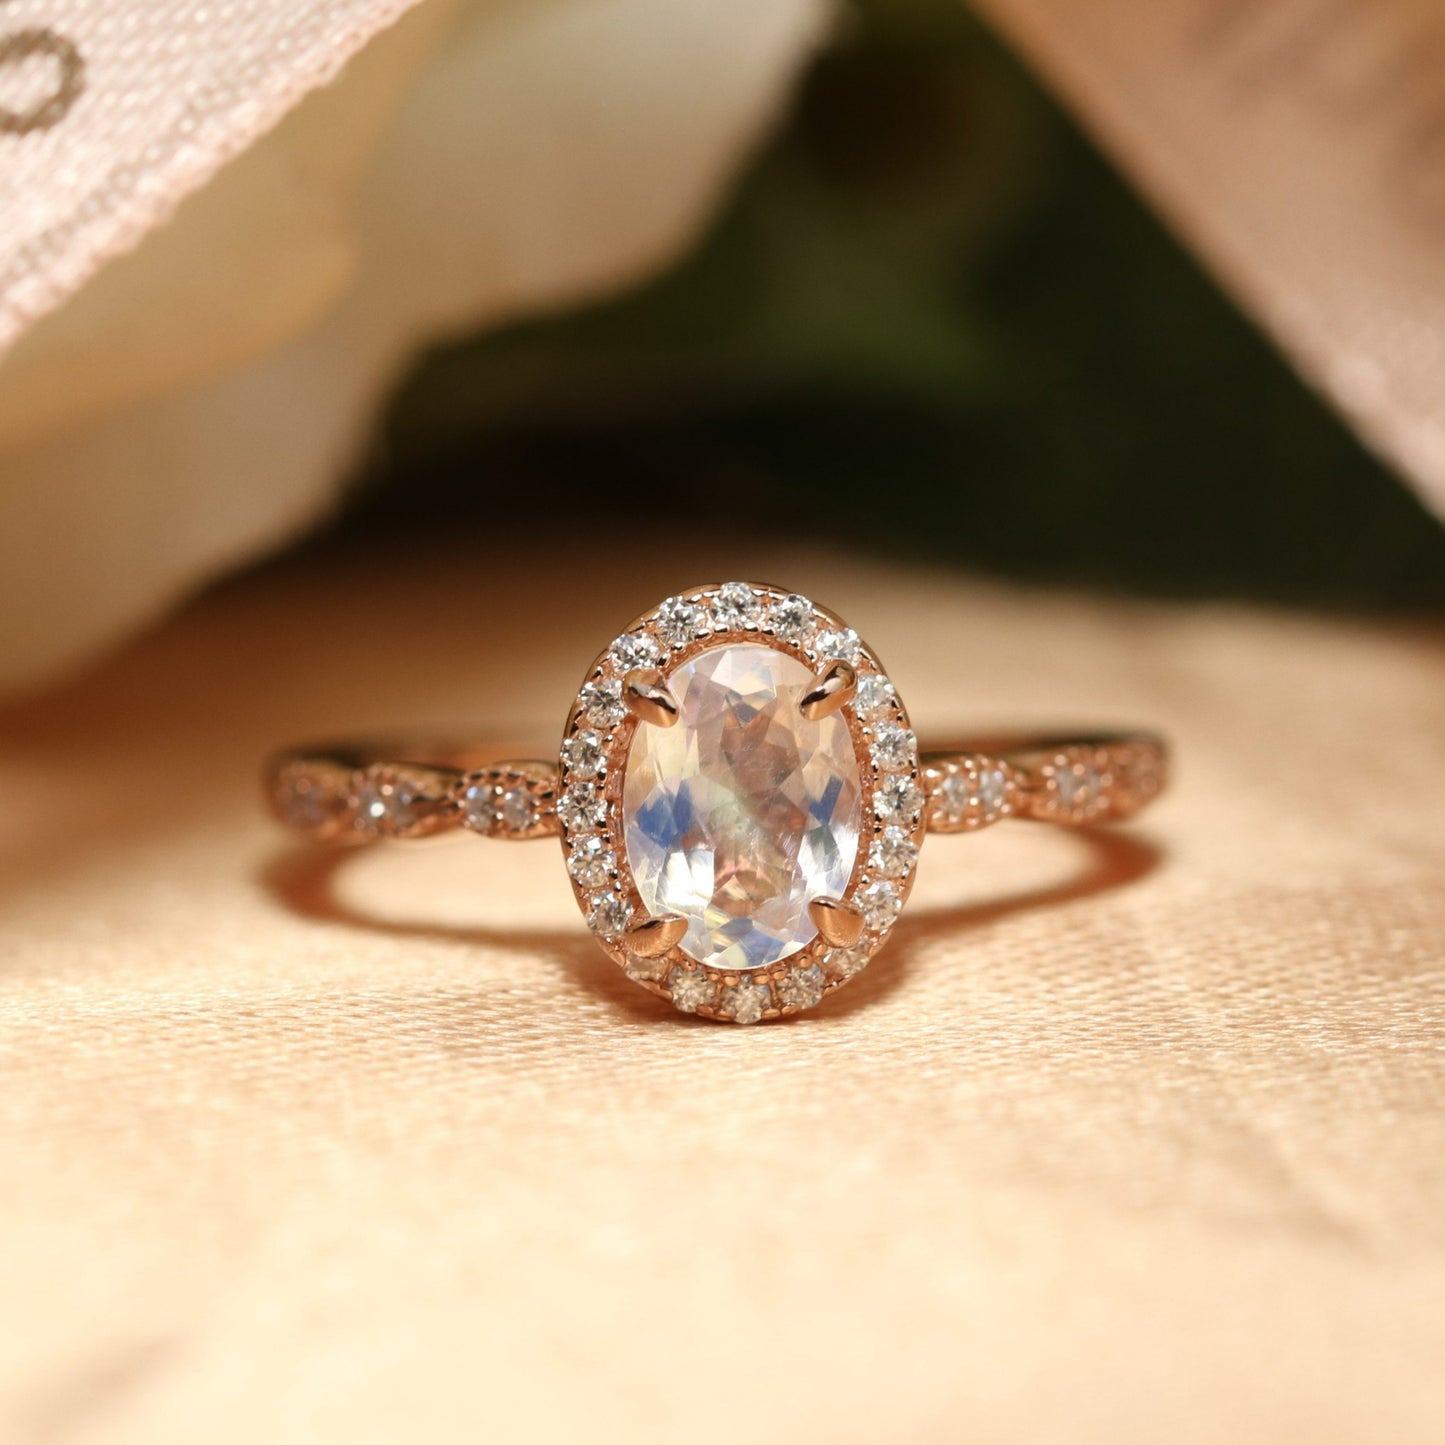 1.5 carat Oval Cut Rainbow Moonstone Vintage Ring in Rose Gold